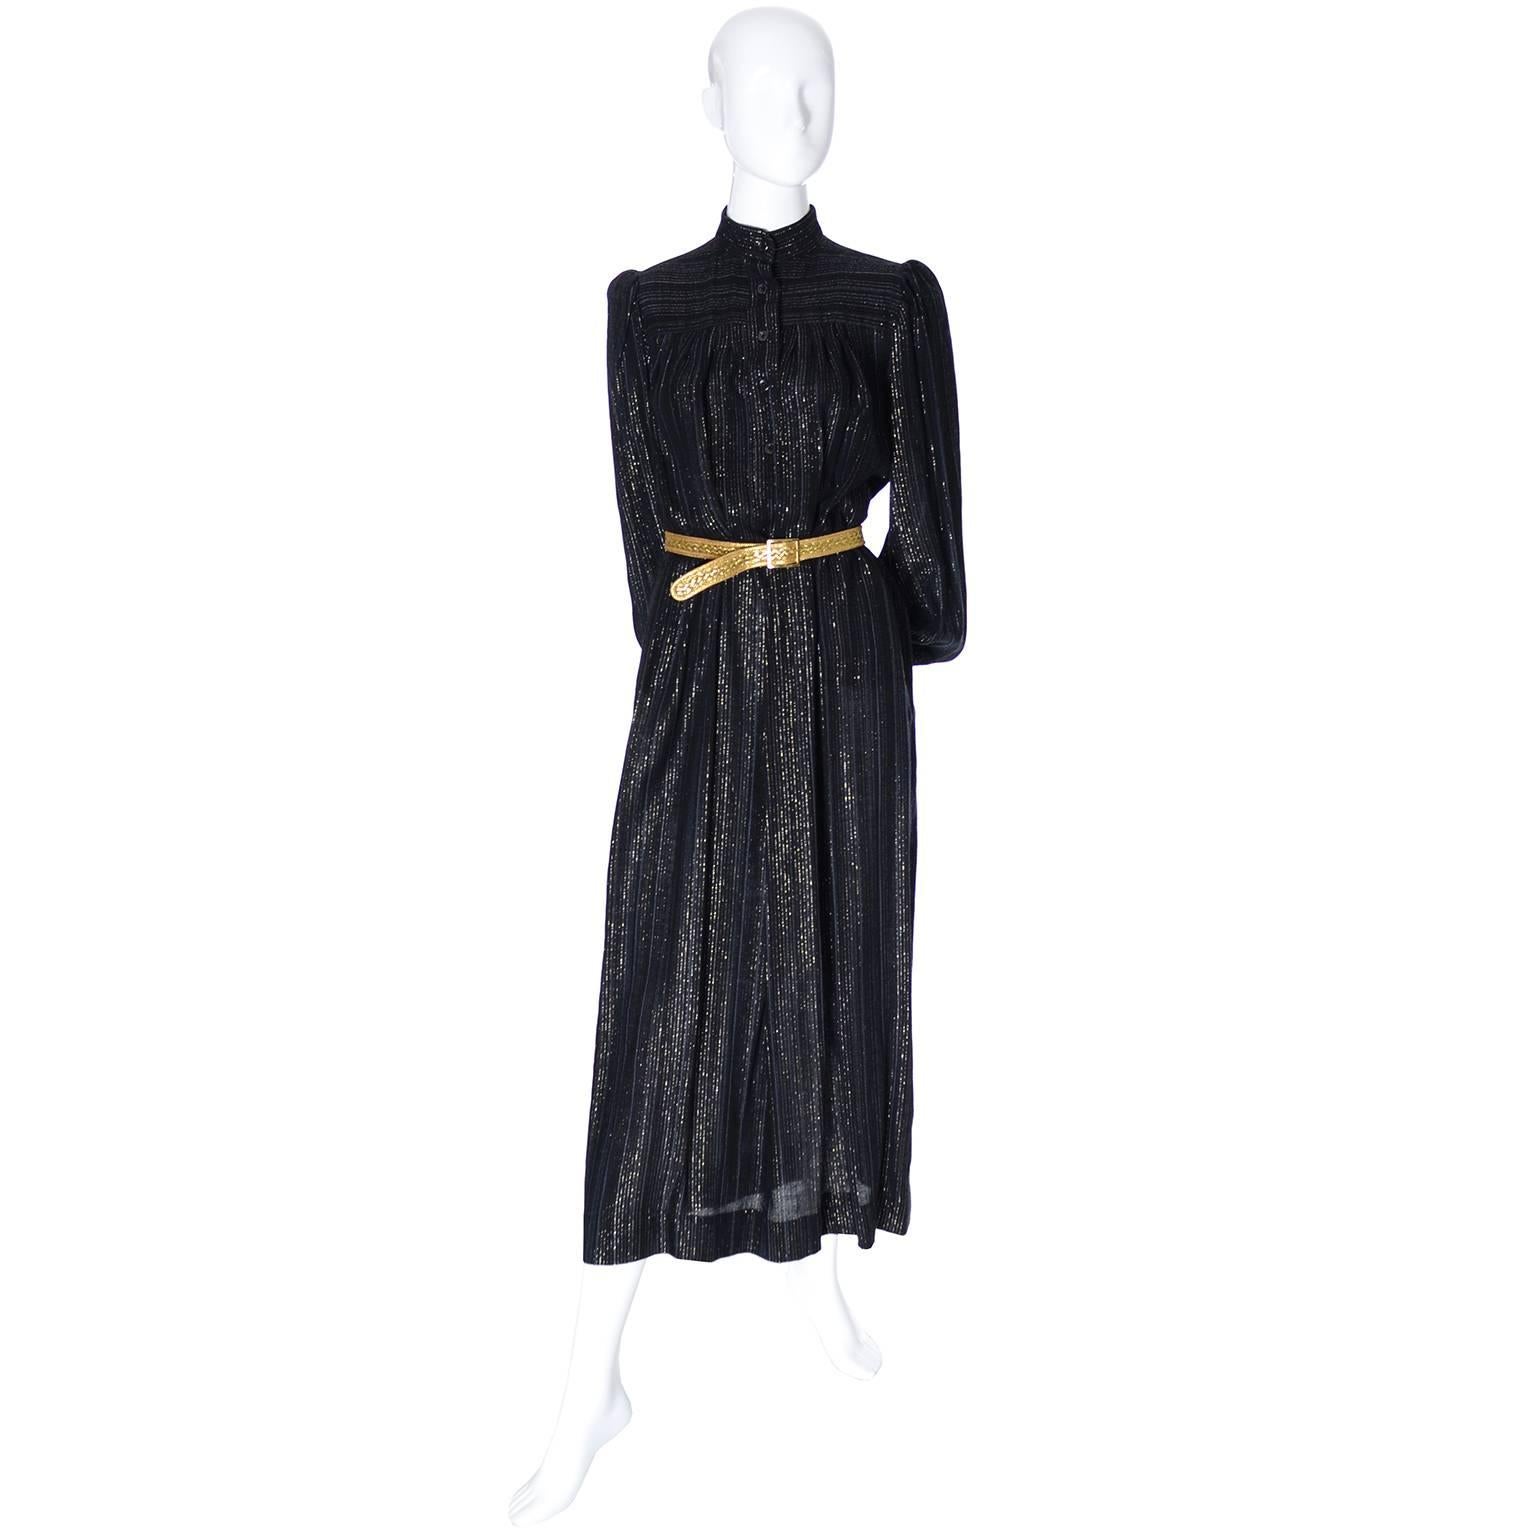 This is a fabulous vintage YSL dress in black and gold metallic fabric with buttons up the front of the bodice and a mandarin collar. The dress has long bishop sleeves and comes with the belt that was with it when I acquired it, though the belt